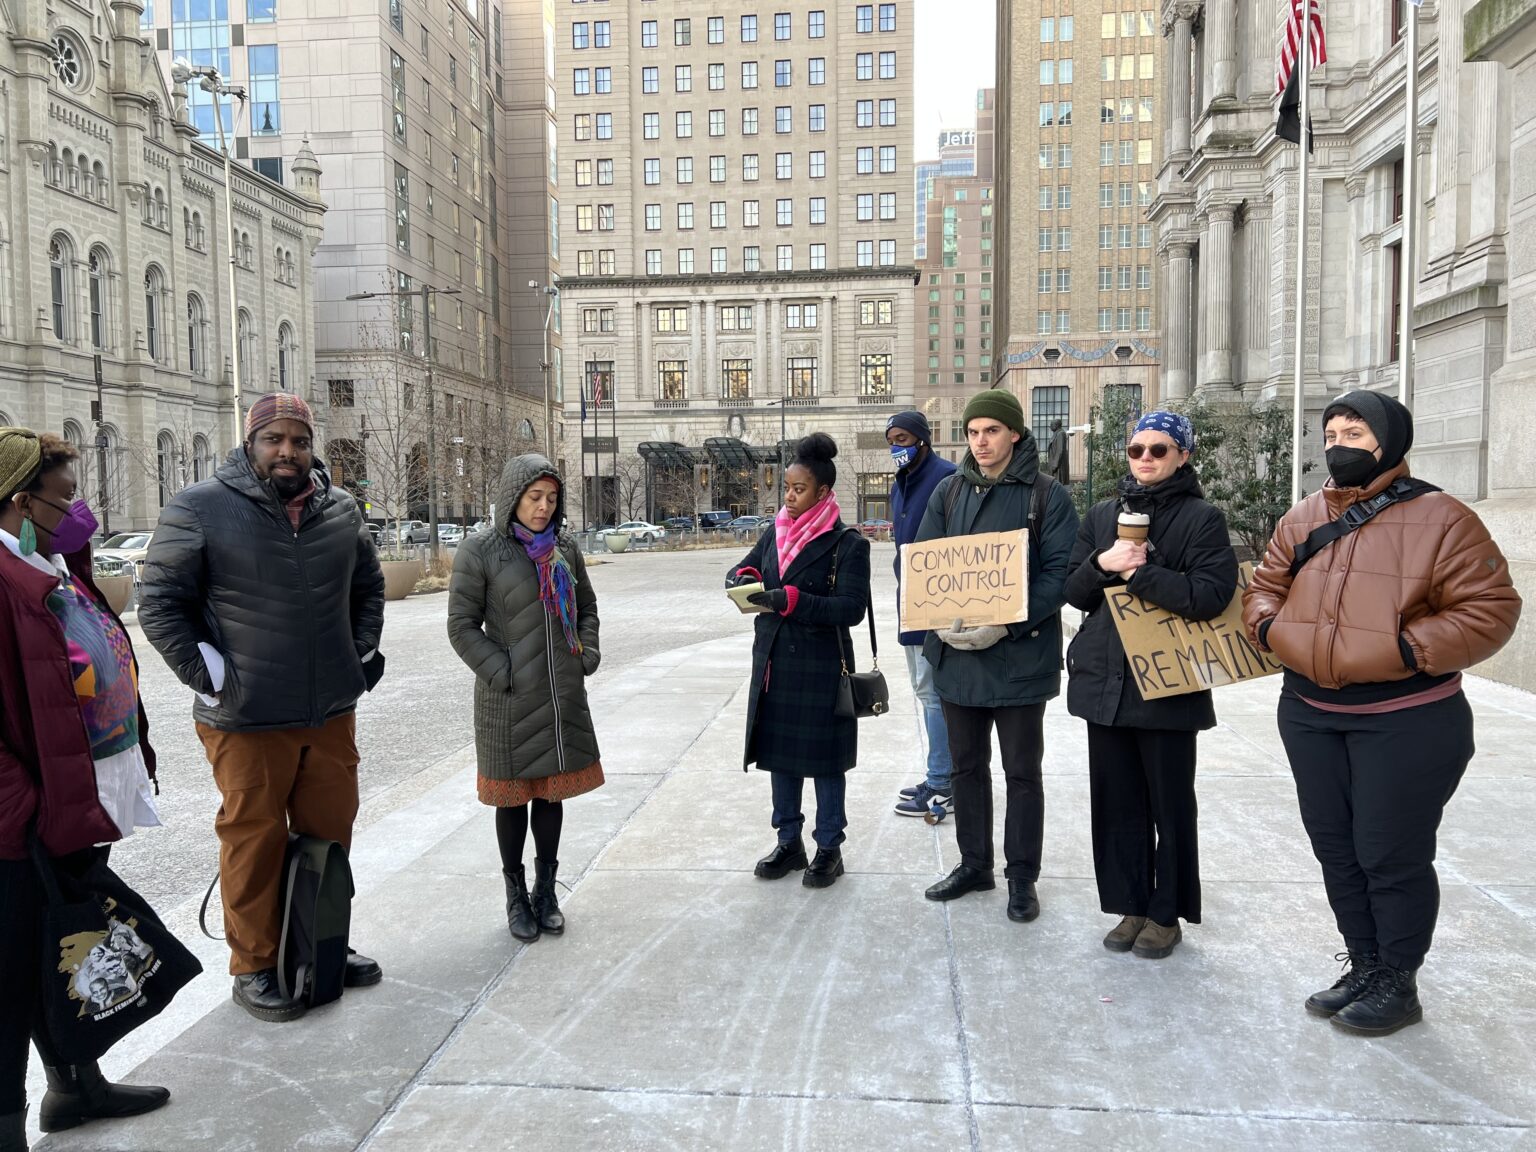 A group of people gathered outside a Philadelphia court